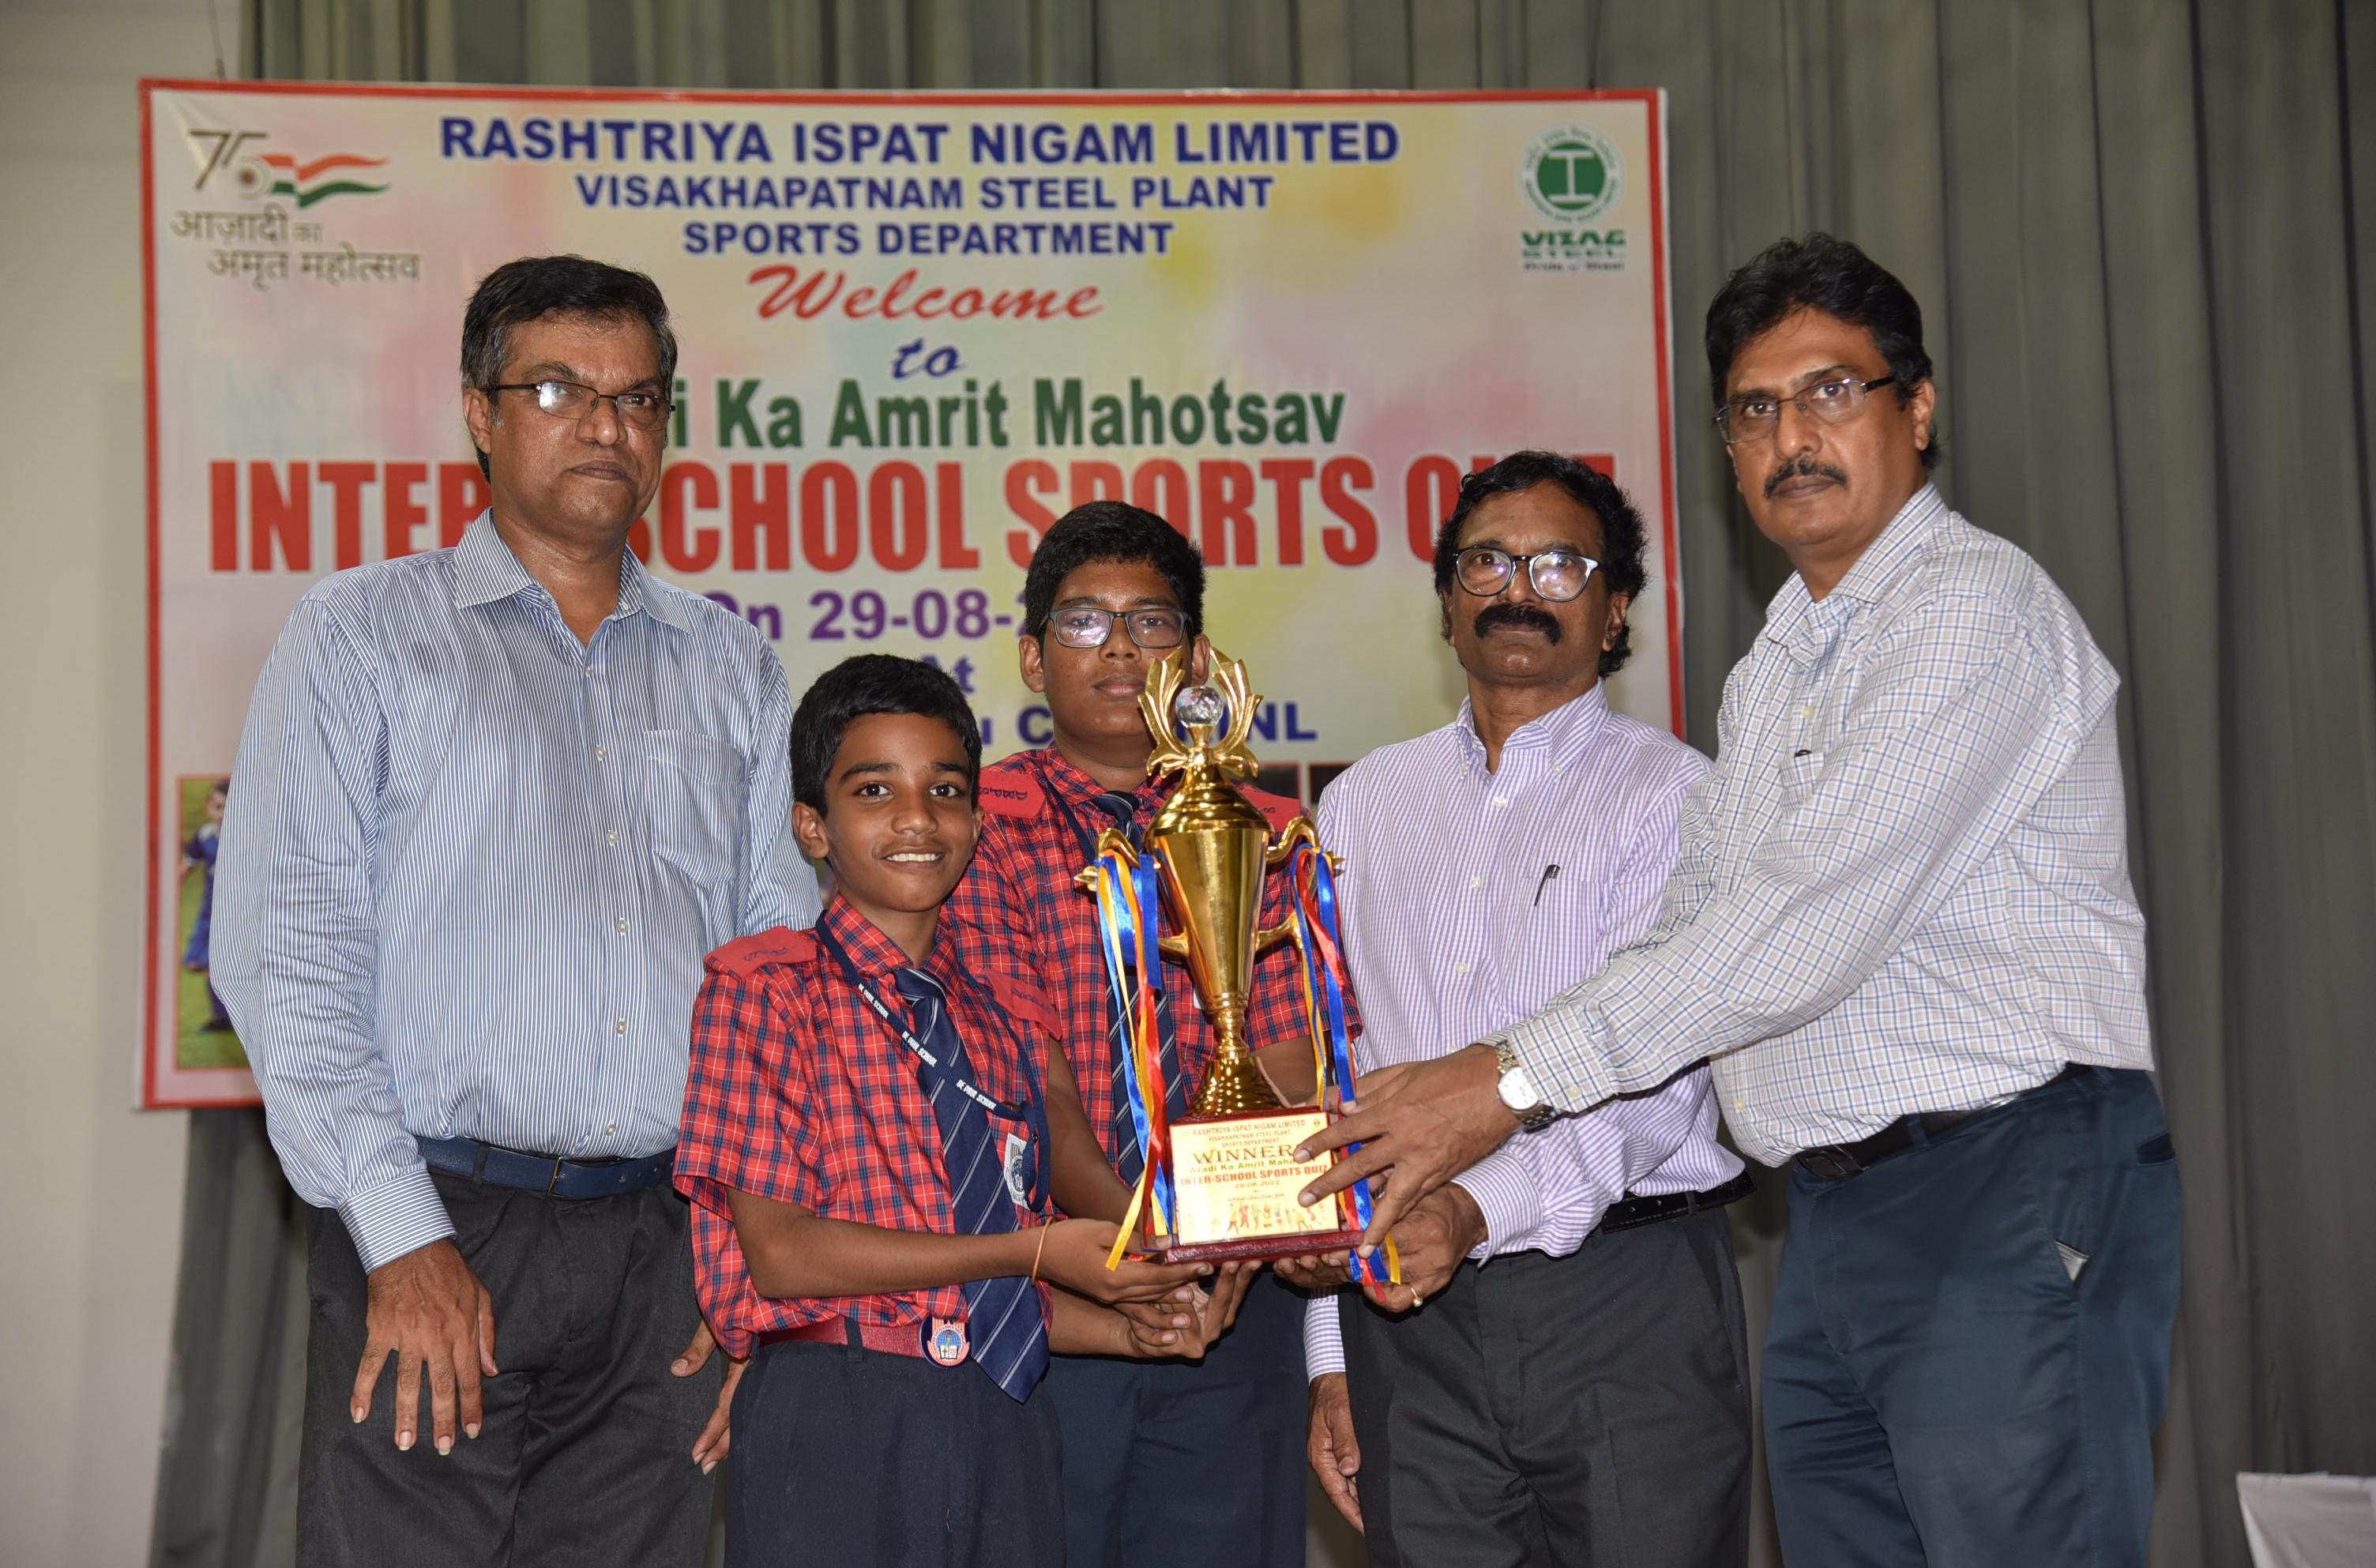 De Paul School emerges as Winners of the Inter-School Sports Quiz conducted by RINL